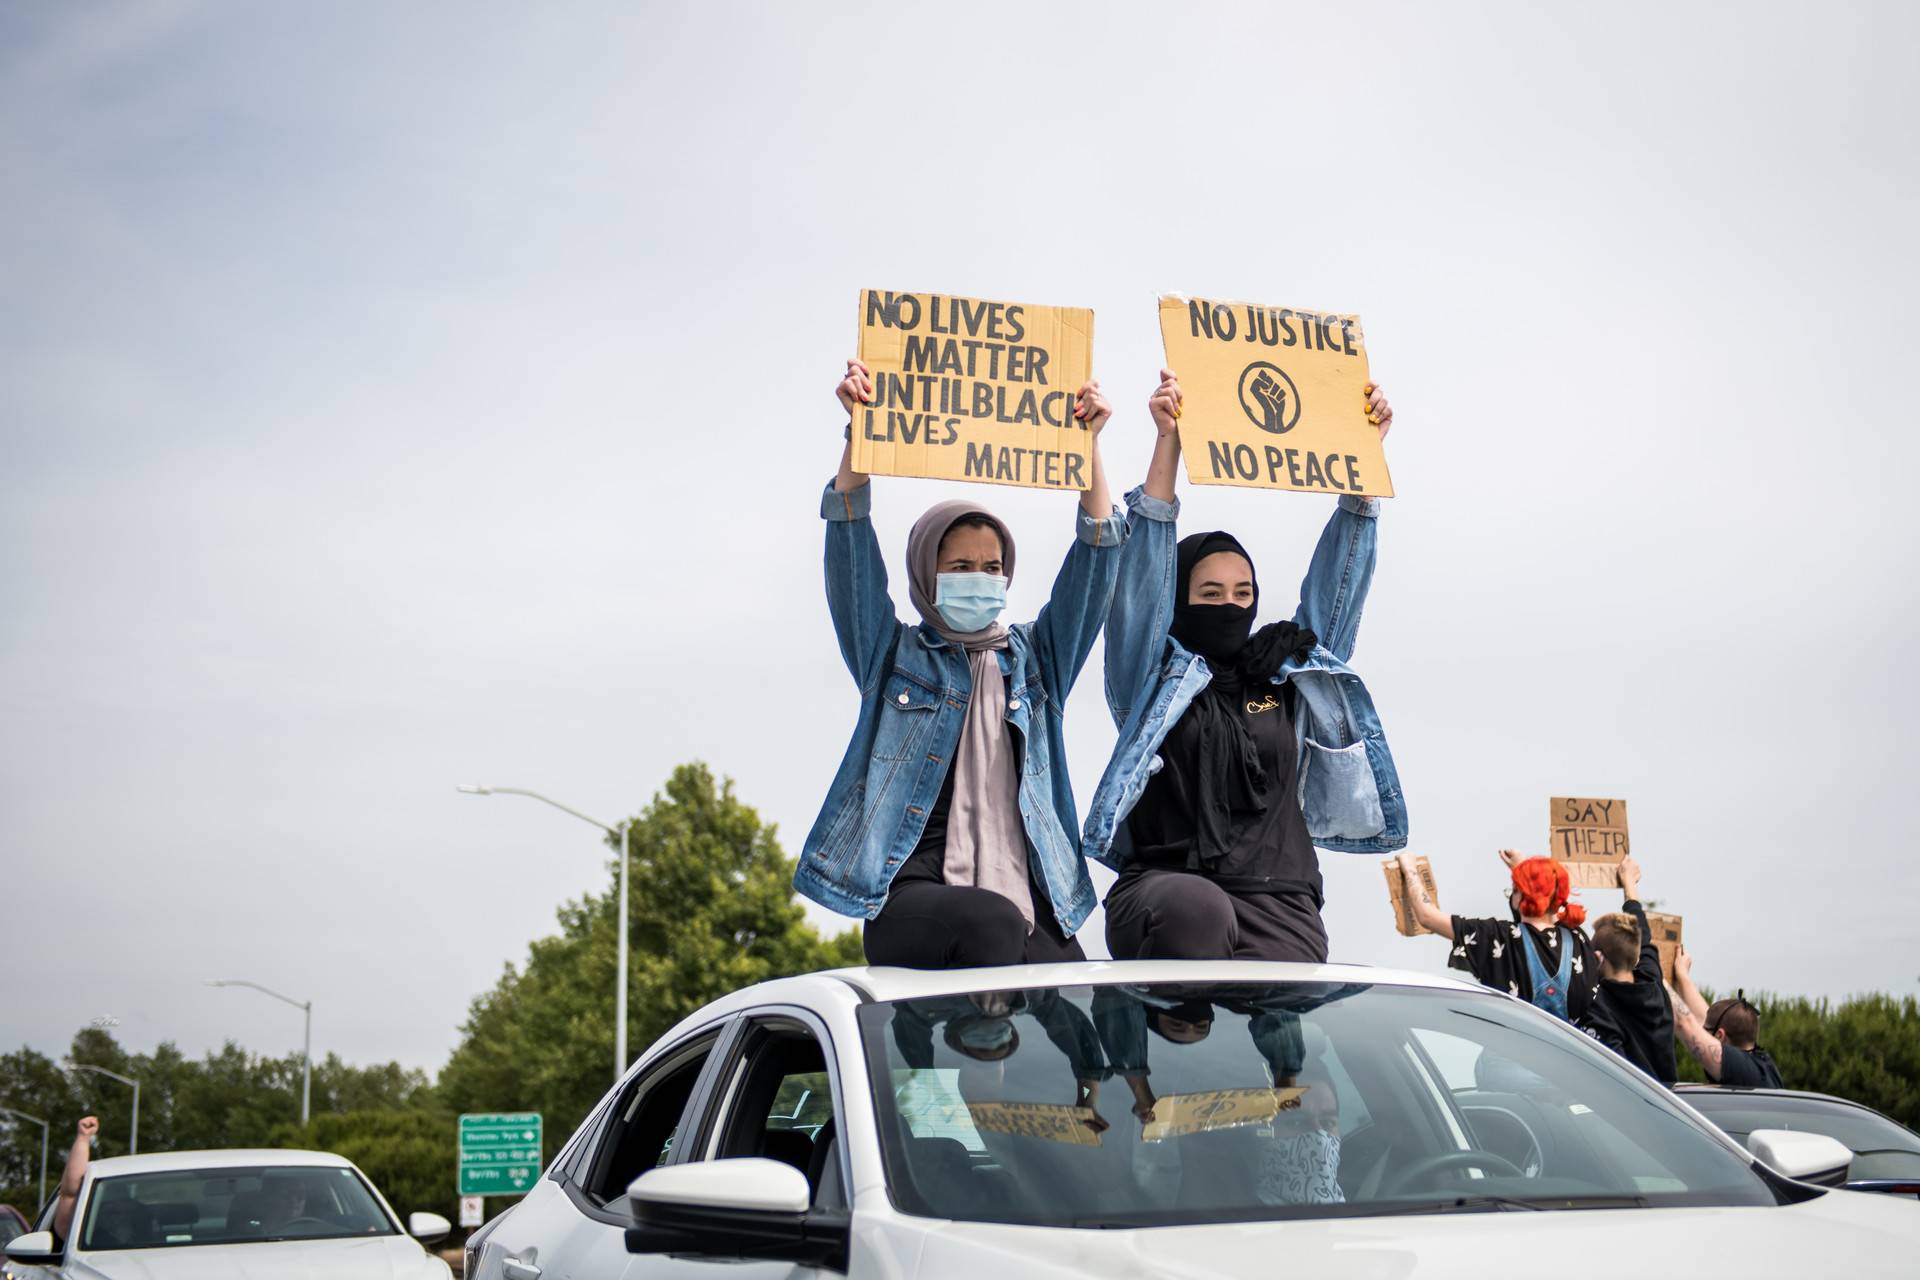 Thousands of vehicles lined up at the Port of Oakland before departing to Lake Merritt on Sunday May 31, 2020 to take part in a caravan protesting the killing of George Floyd and other Black people at the hands of the police. Beth LaBerge/KQED